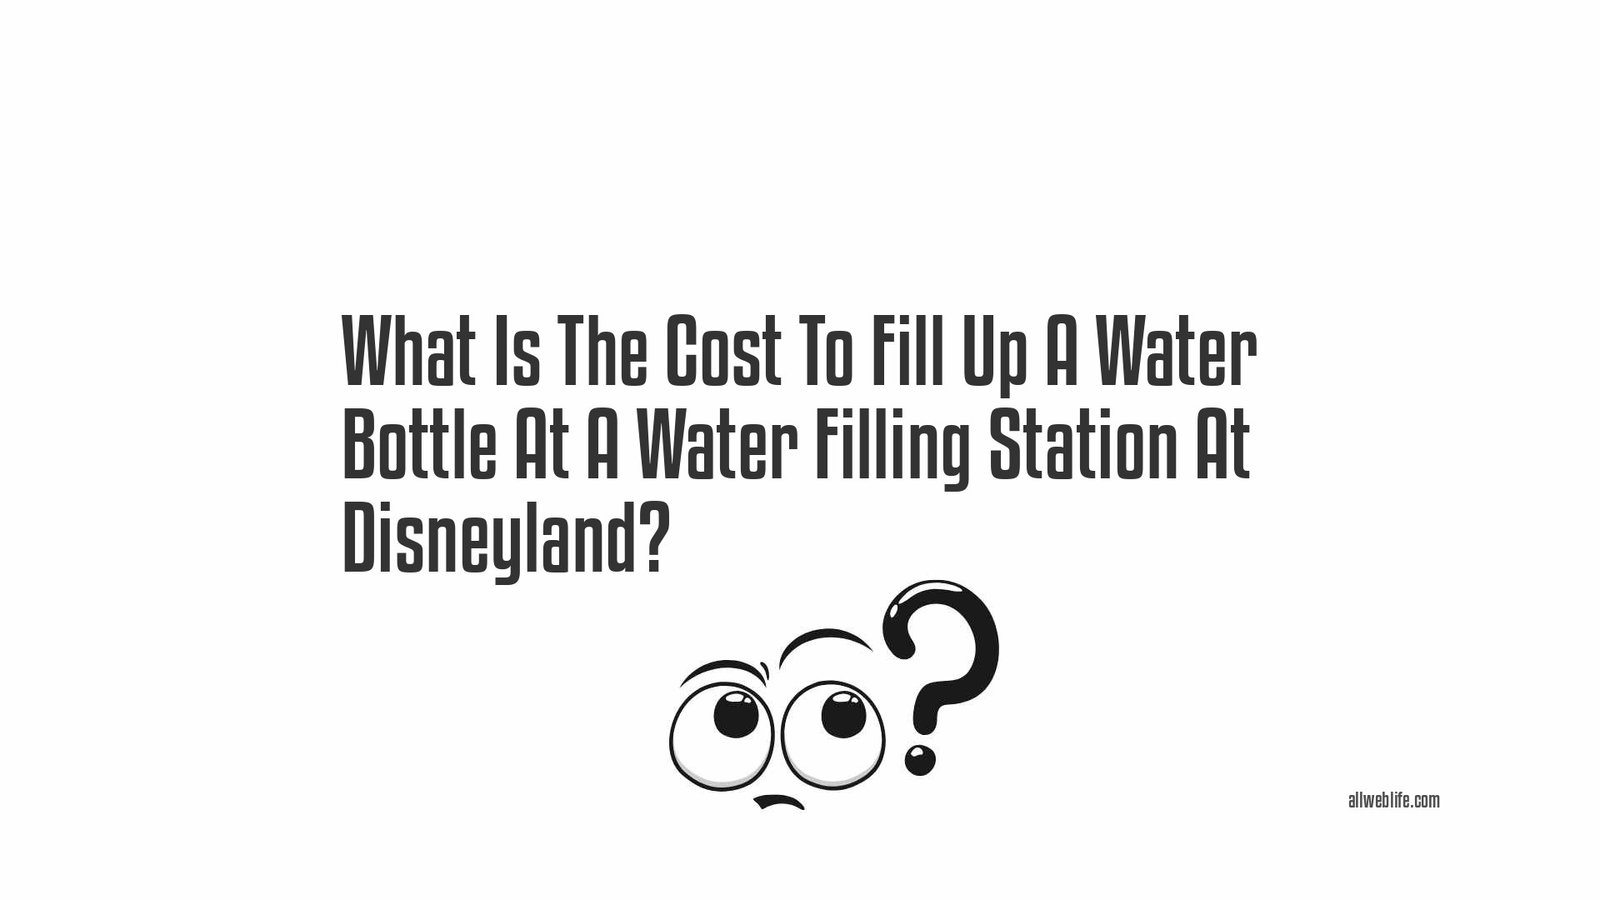 What Is The Cost To Fill Up A Water Bottle At A Water Filling Station At Disneyland?